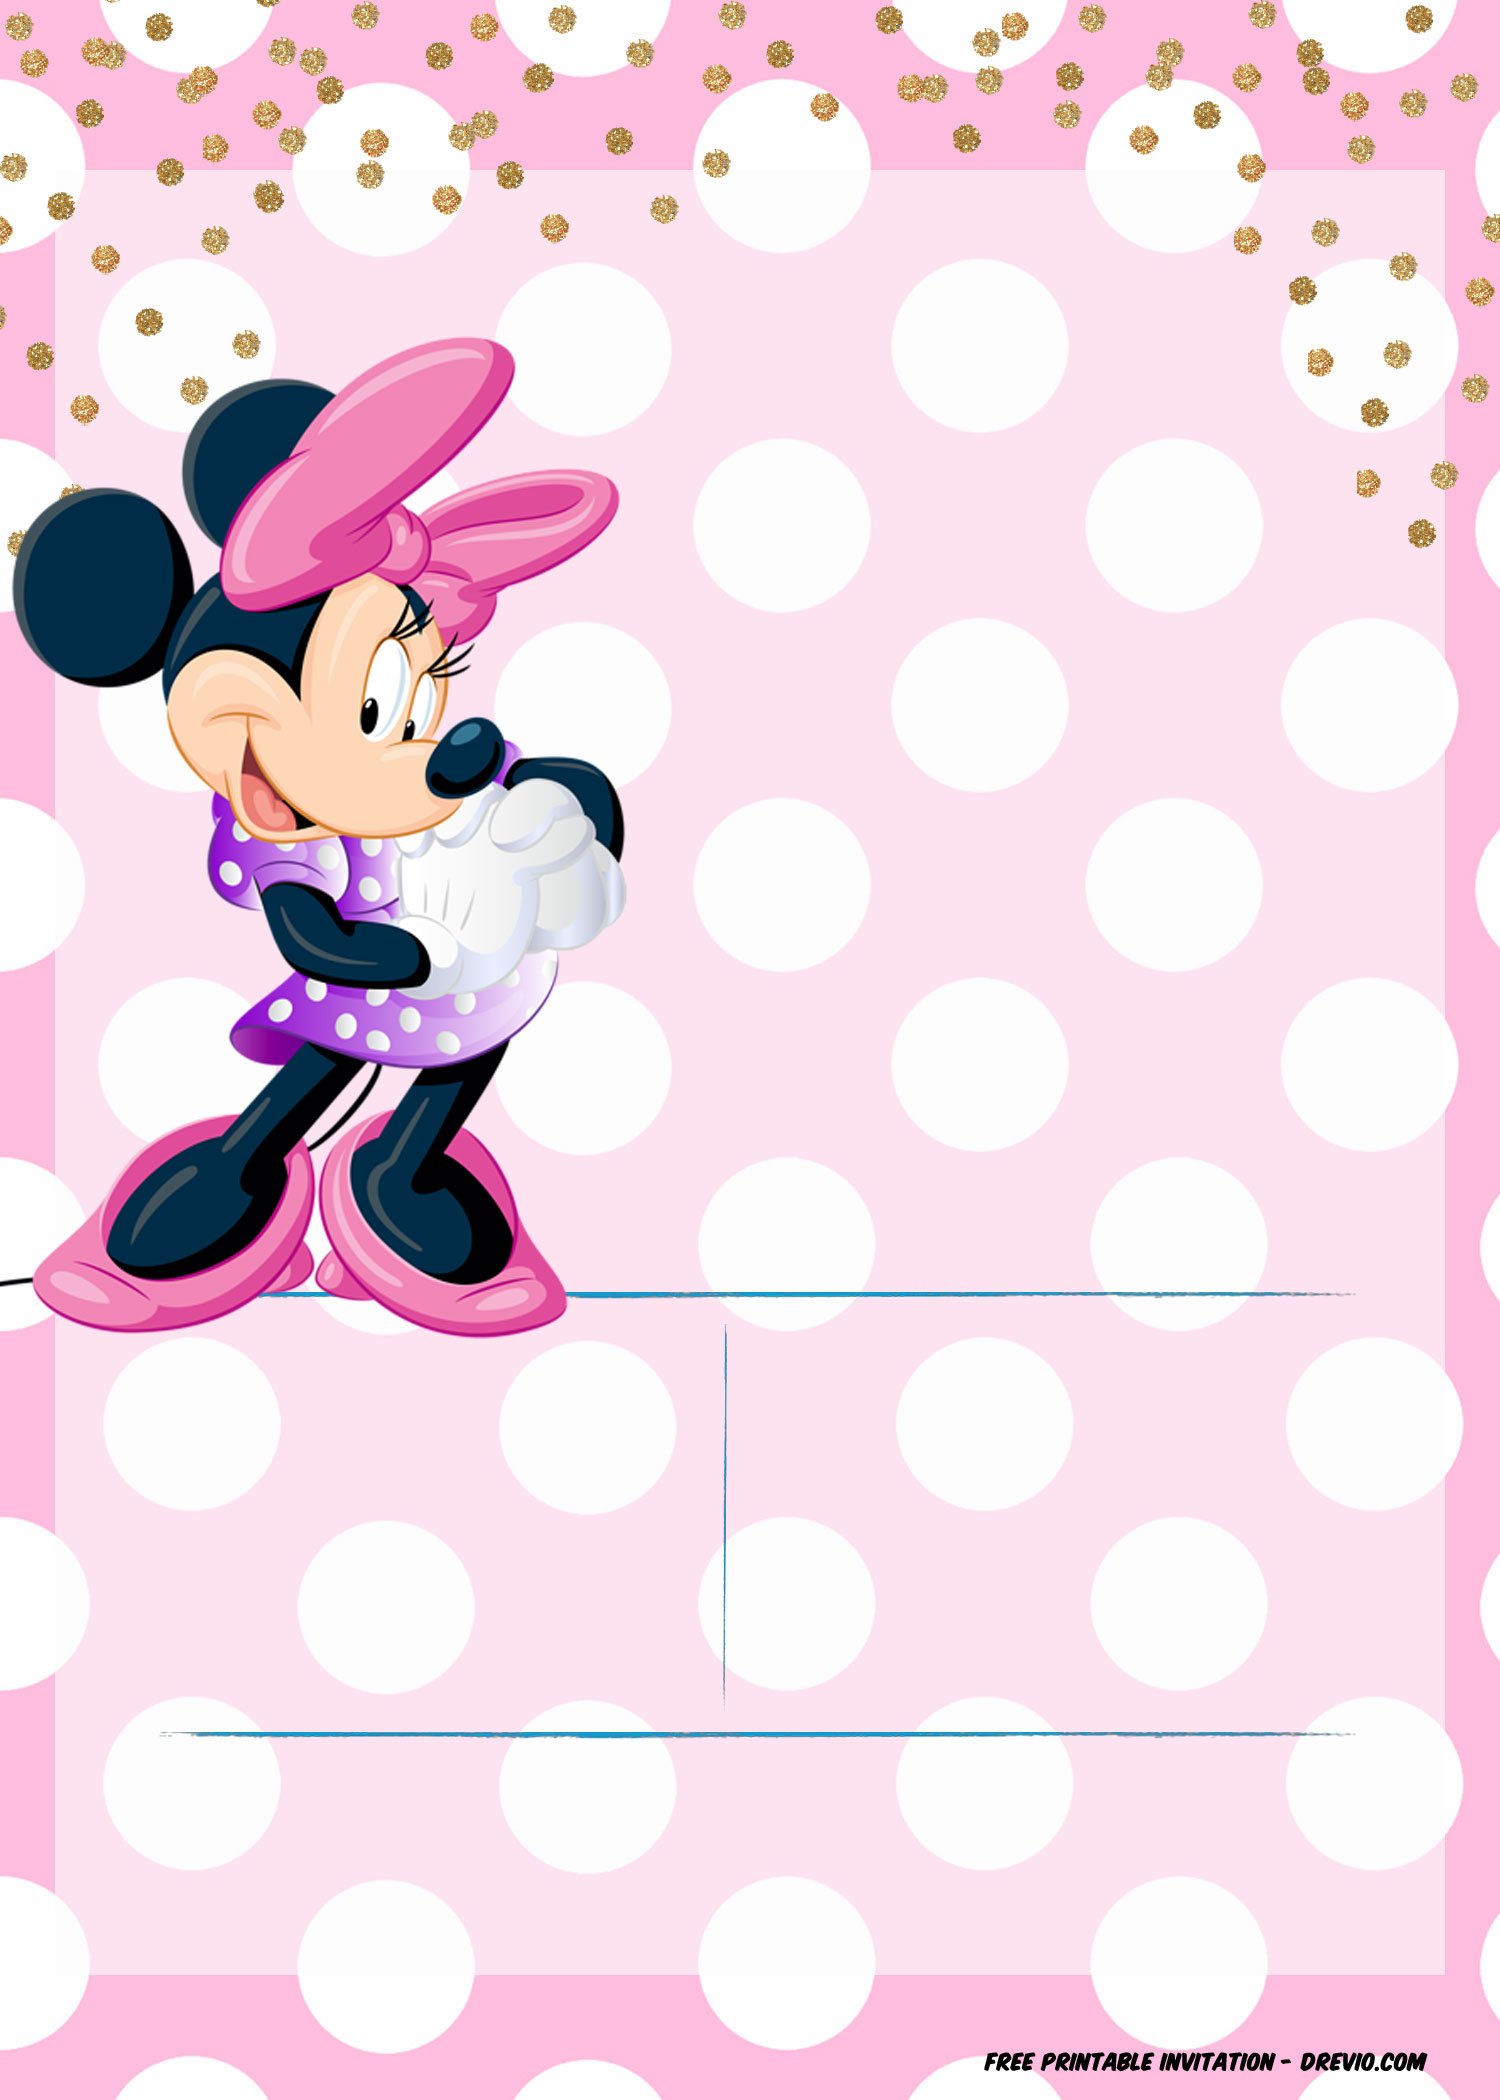 Minnie Mouse Invitation Template - Editable and FREE ...